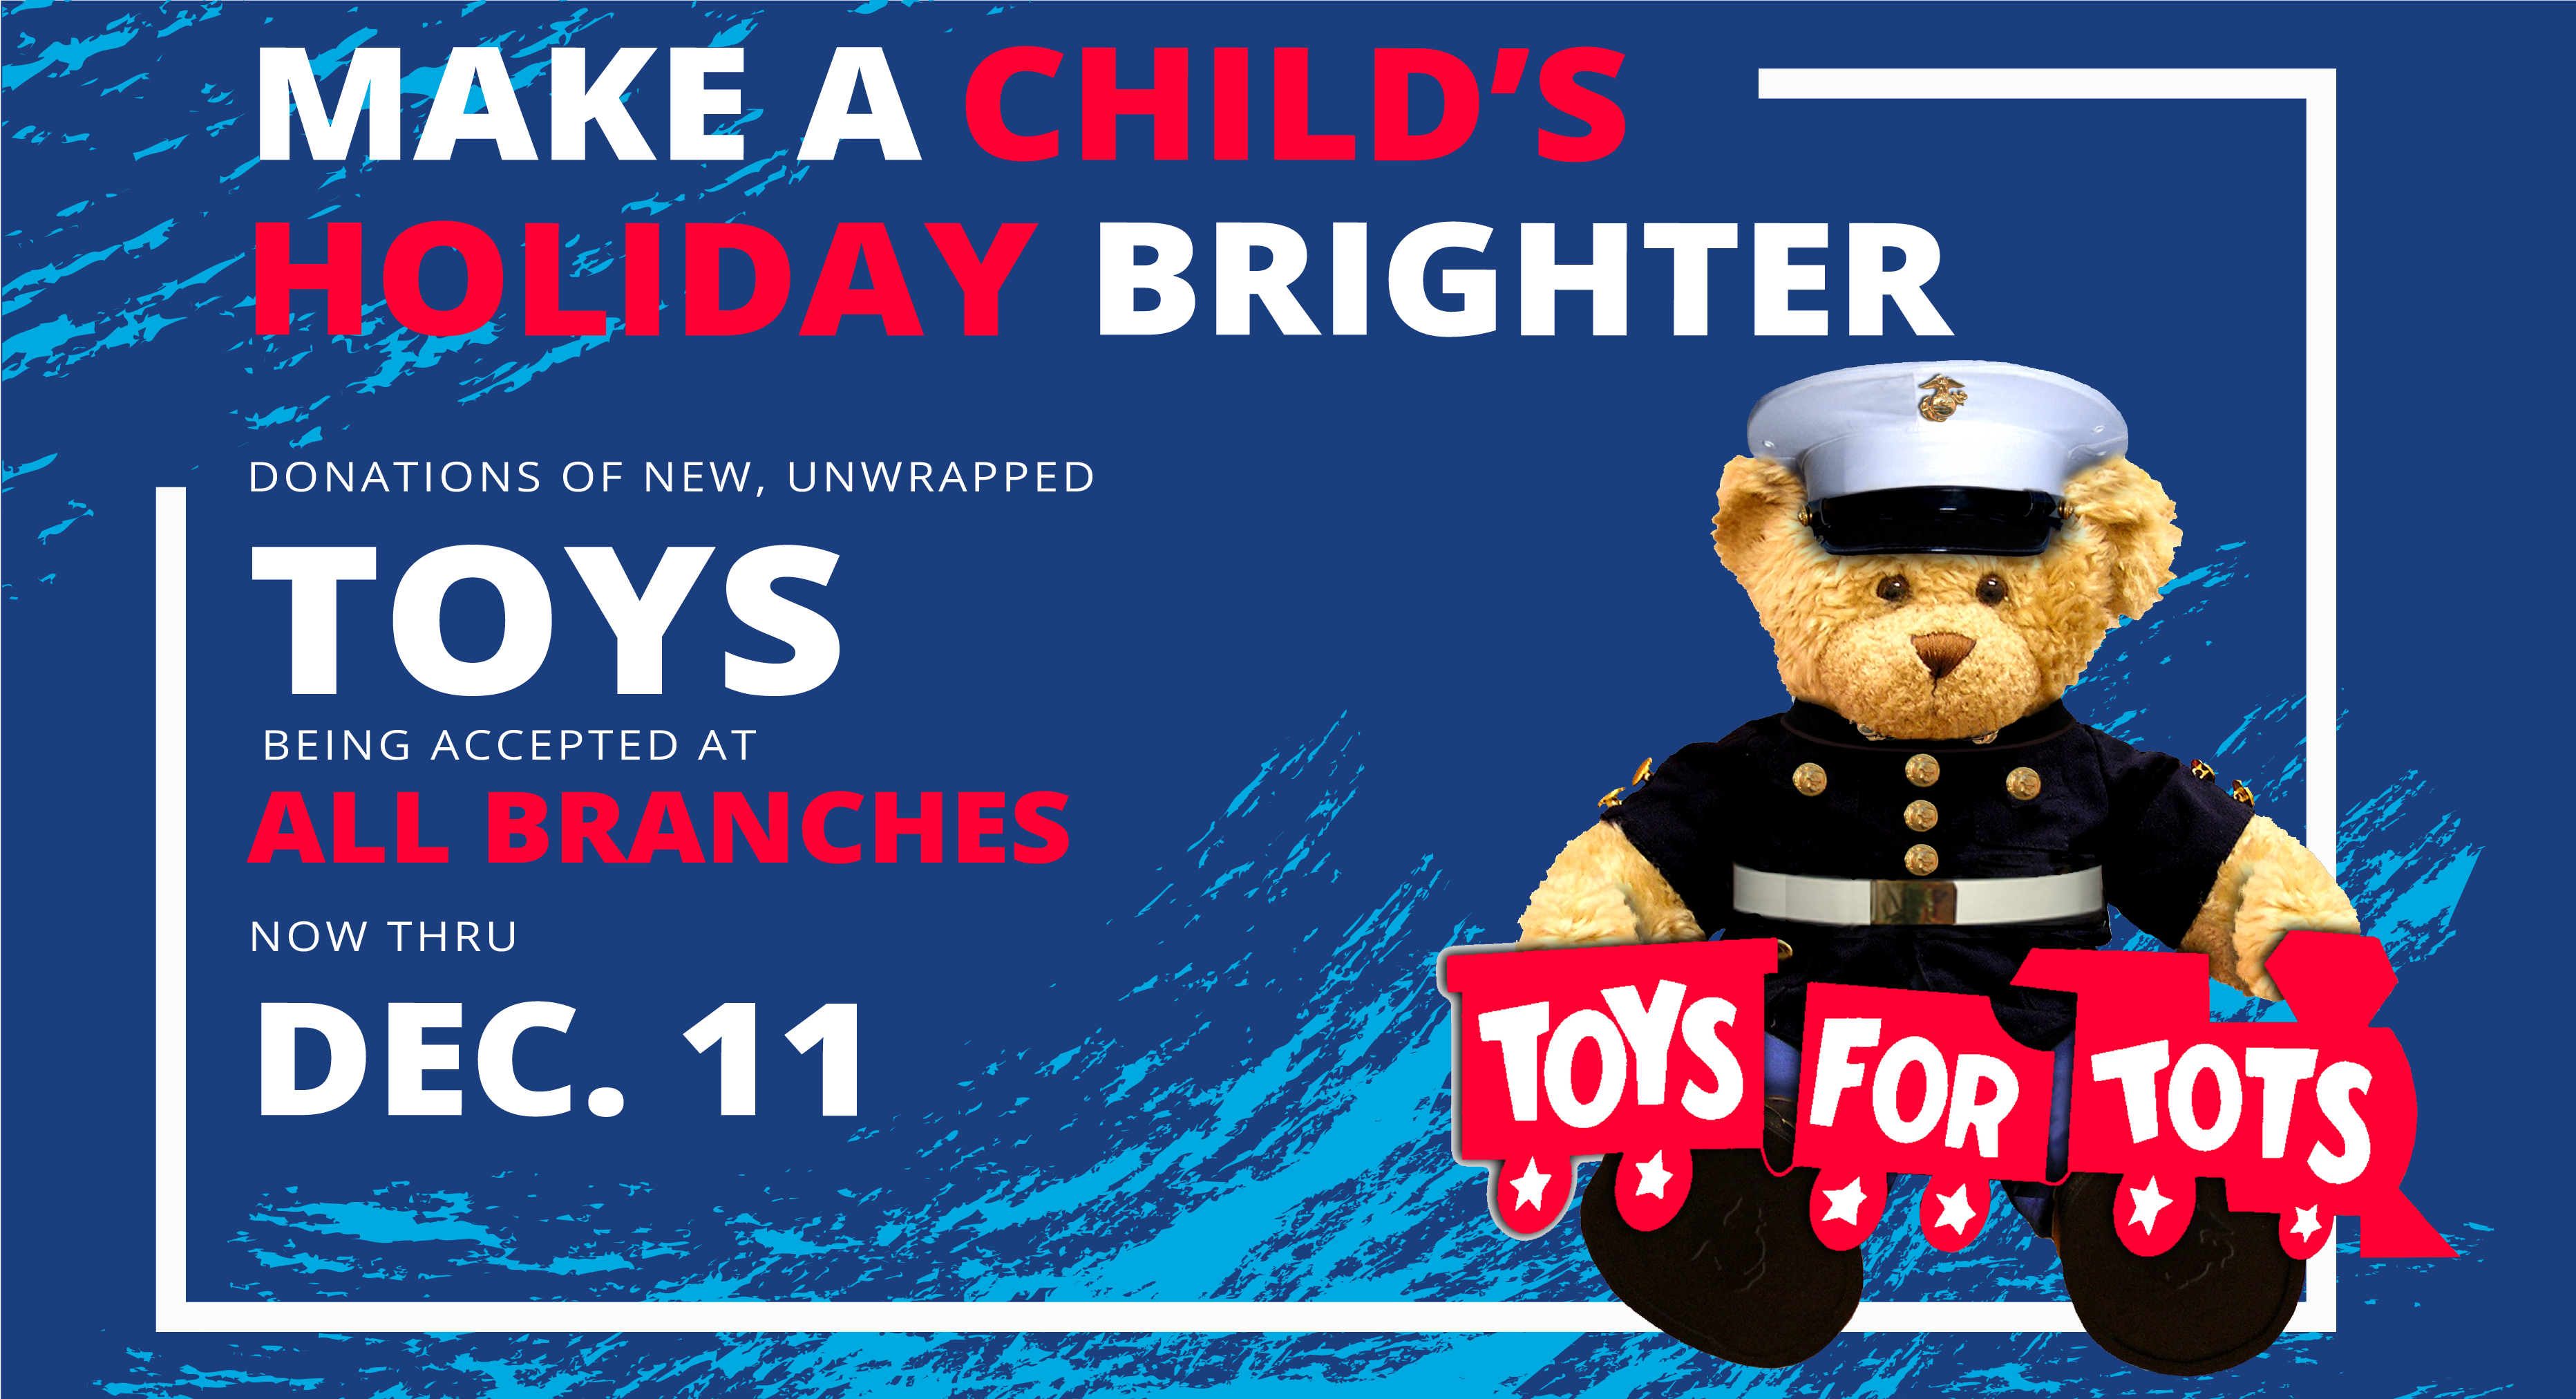 Make a child's holiday brighter! Donations of new, unwrapped toys being accepted at all branches now through December 11th.